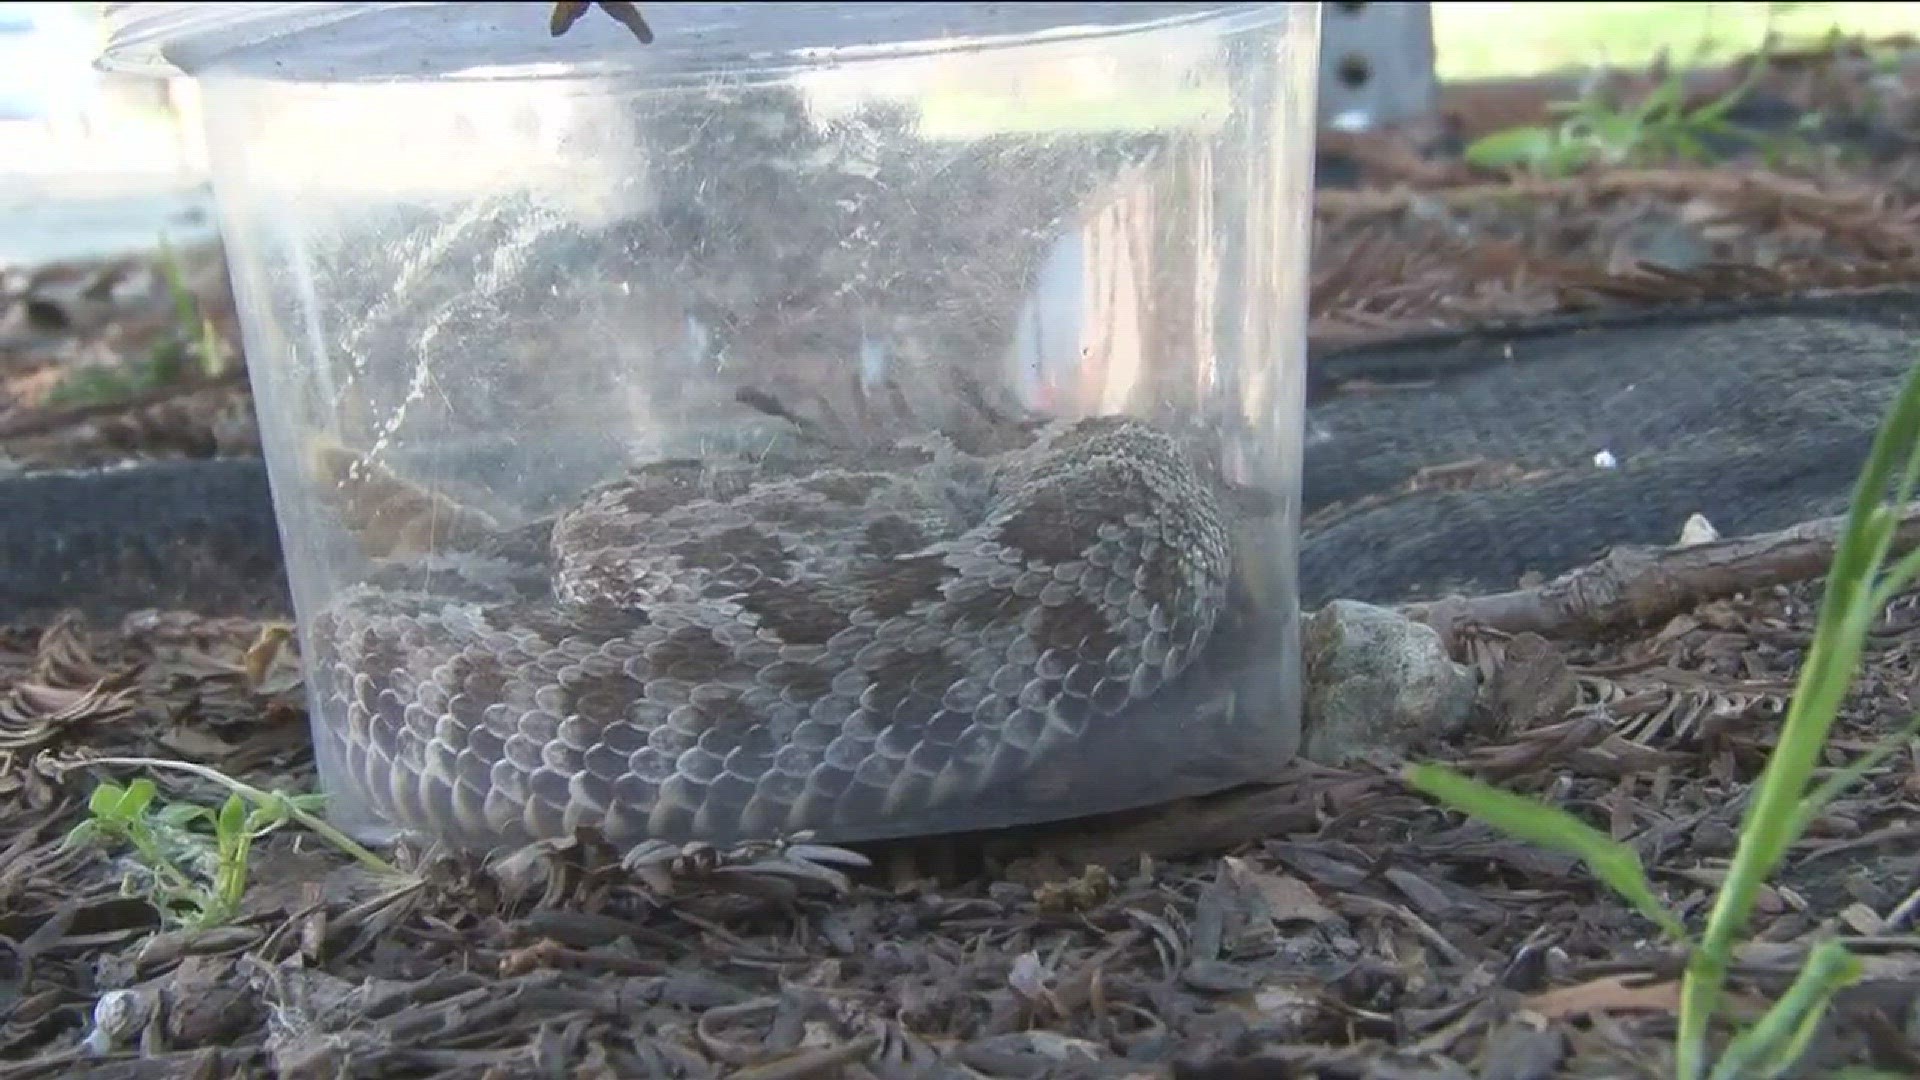 All the rain is helping grass and plants grow this spring, but that rain is also helping something else grow...Rattlesnakes. The dangerous reptiles are making an early appearance this year. (Mar. 29, 2017)